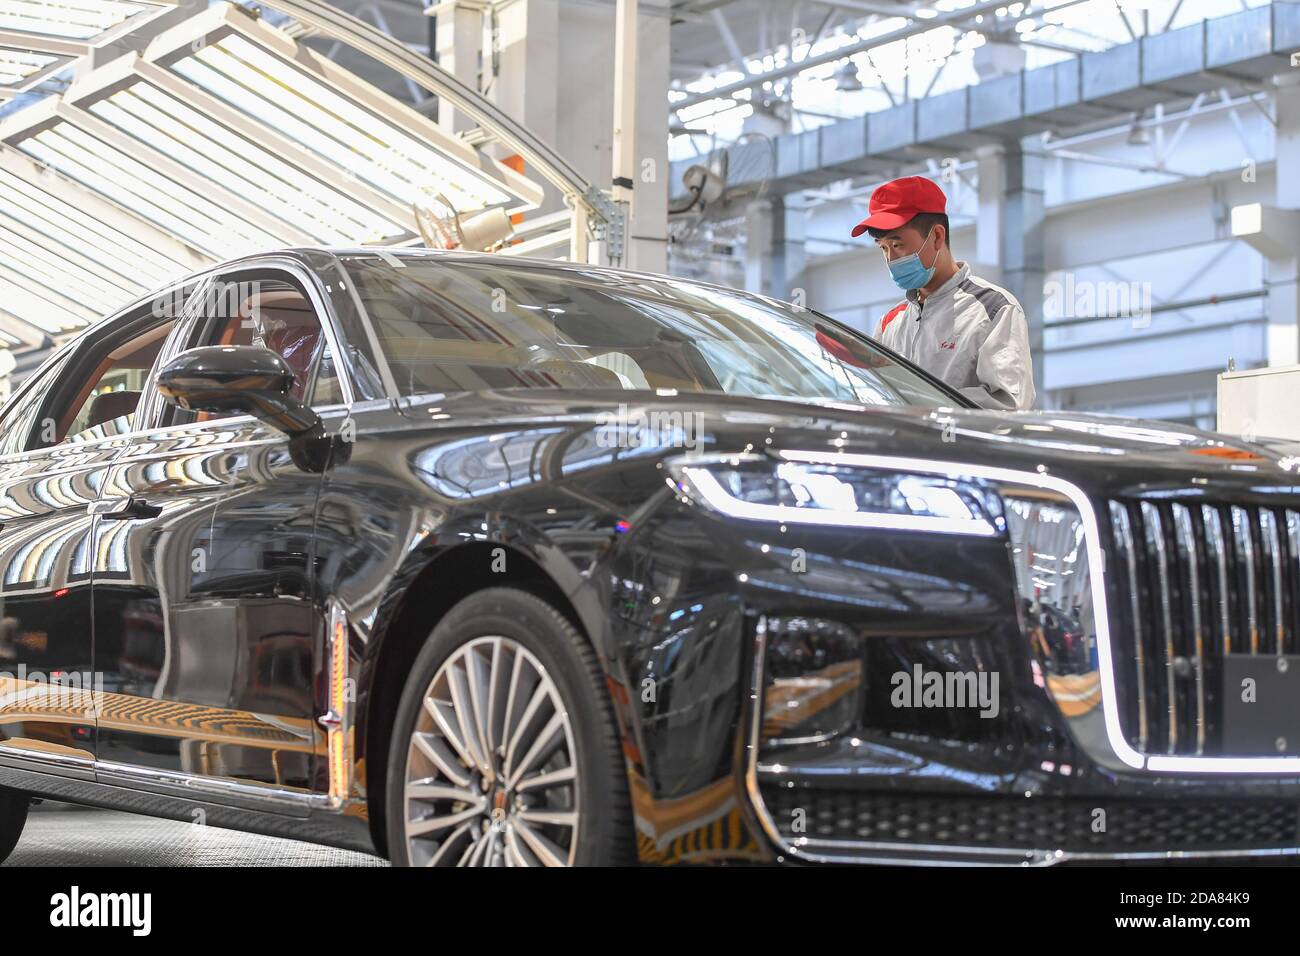 Changchun, China's Jilin Province. 23rd Sep, 2020. A worker checks a vehicle at the general assembly line of Hongqi, the leading sedan brand of First Automotive Works (FAW) Group Co. Ltd., in Changchun, northeast China's Jilin Province, Sept. 23, 2020. First Automotive Works (FAW) Group Co. Ltd., China's leading automaker, sold more than 3.01 million vehicles in the first 10 months of this year, an increase of 7.8 percent year on year, the company said. Credit: Zhang Nan/Xinhua/Alamy Live News Stock Photo